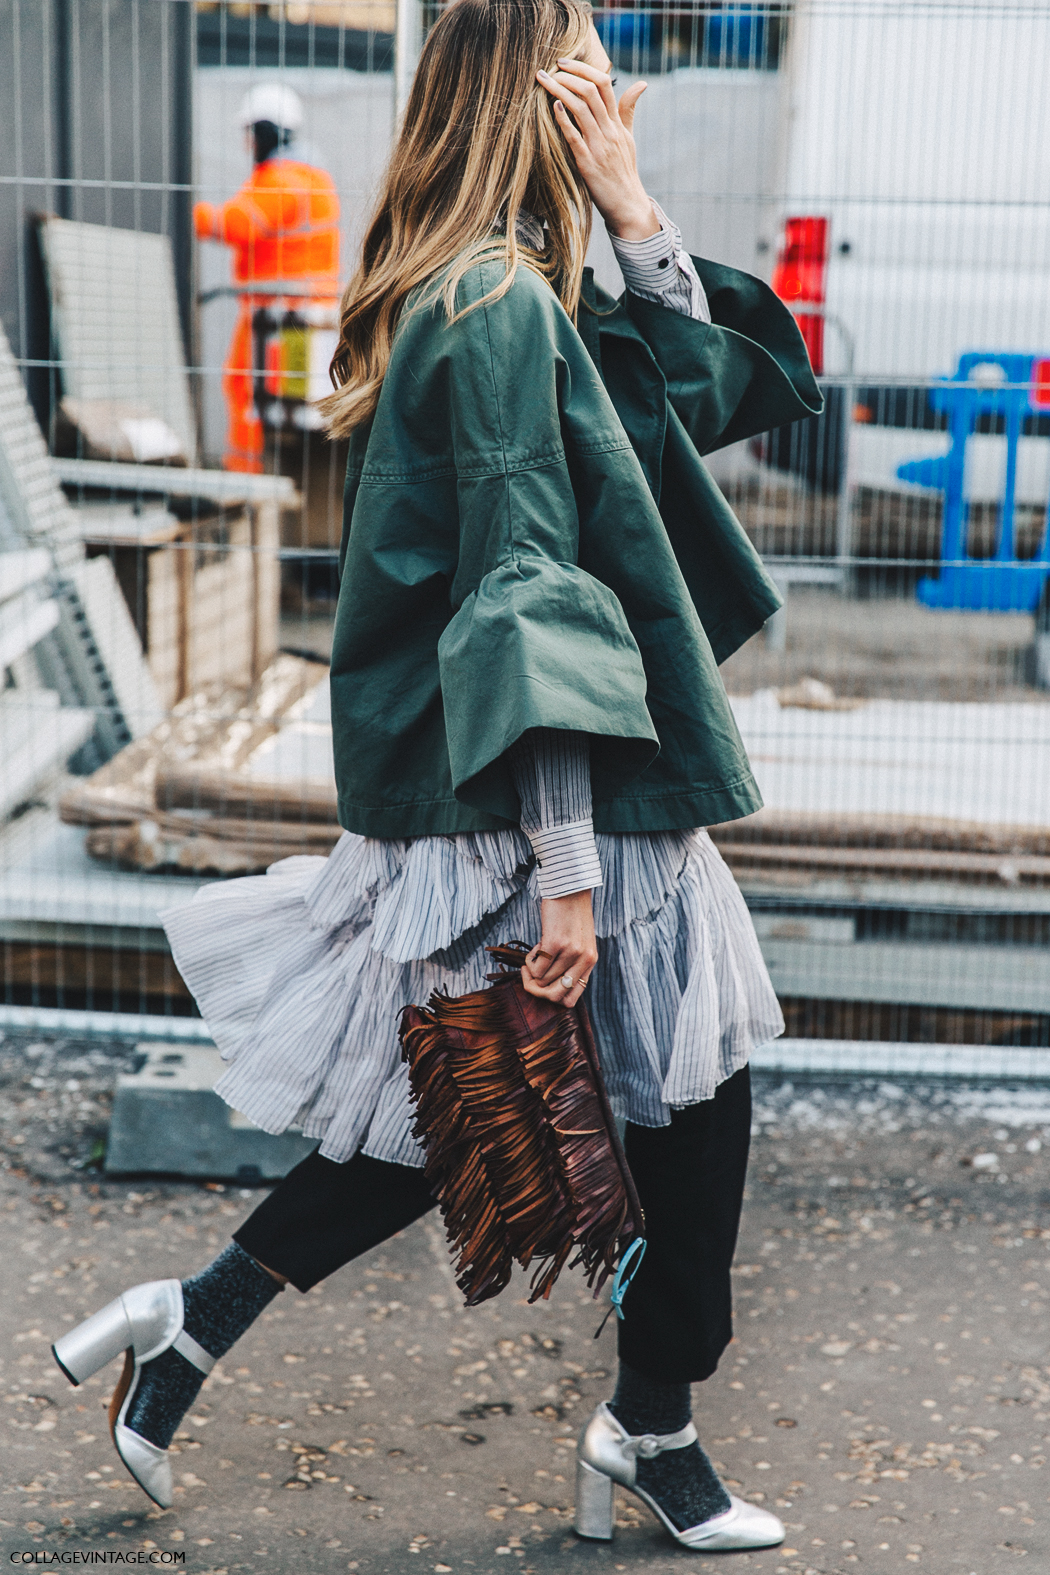 LFW-London_Fashion_Week_Fall_16-Street_Style-Collage_Vintage-Ruffled_Outfit-Silver_Shoes-Mettalic-Glitter_Socks-